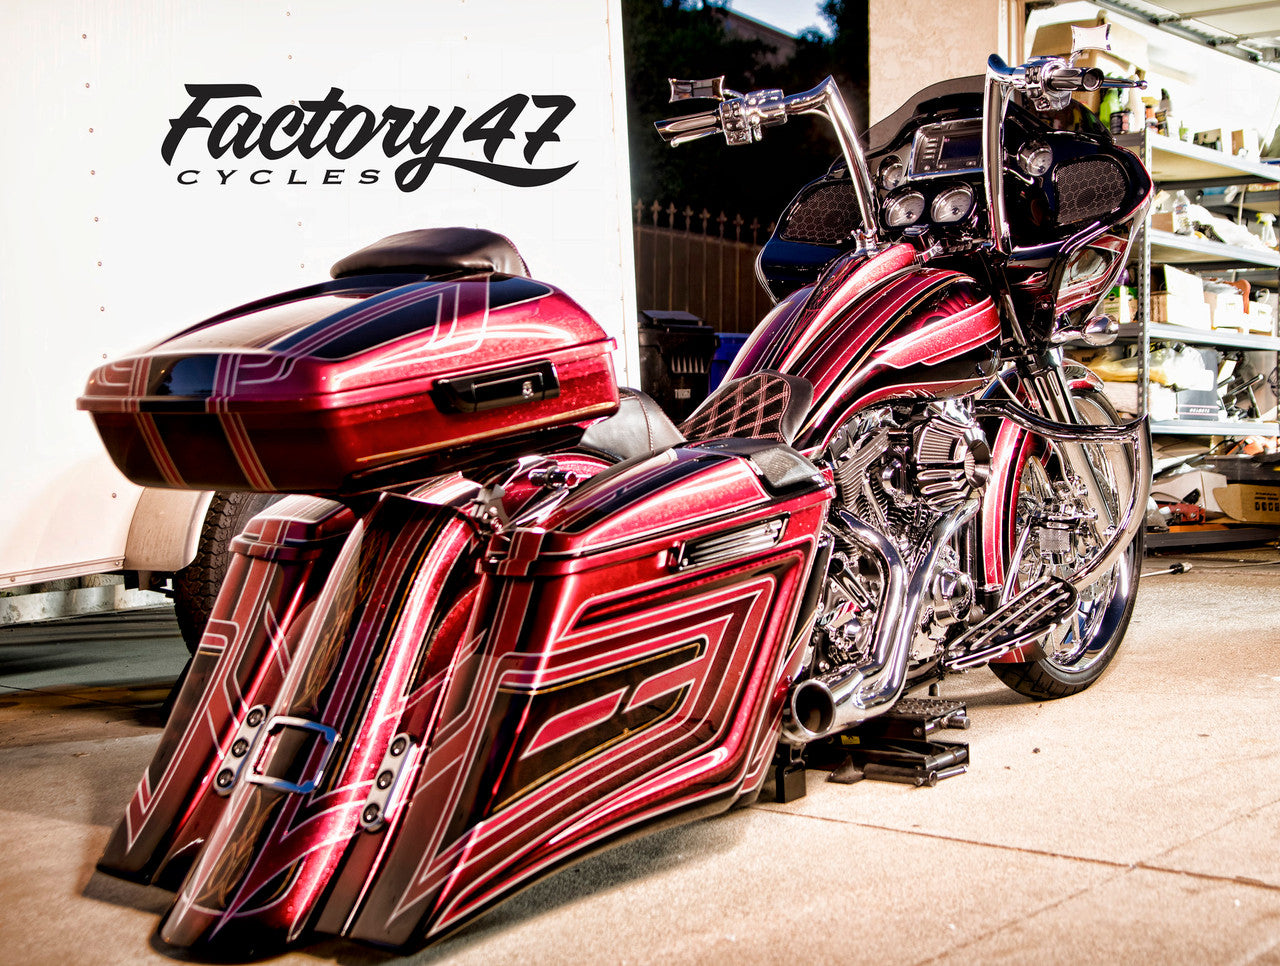 A red and black Factory 47 Signature Handlebar Chrome 14" motorcycle parked in front of a building.